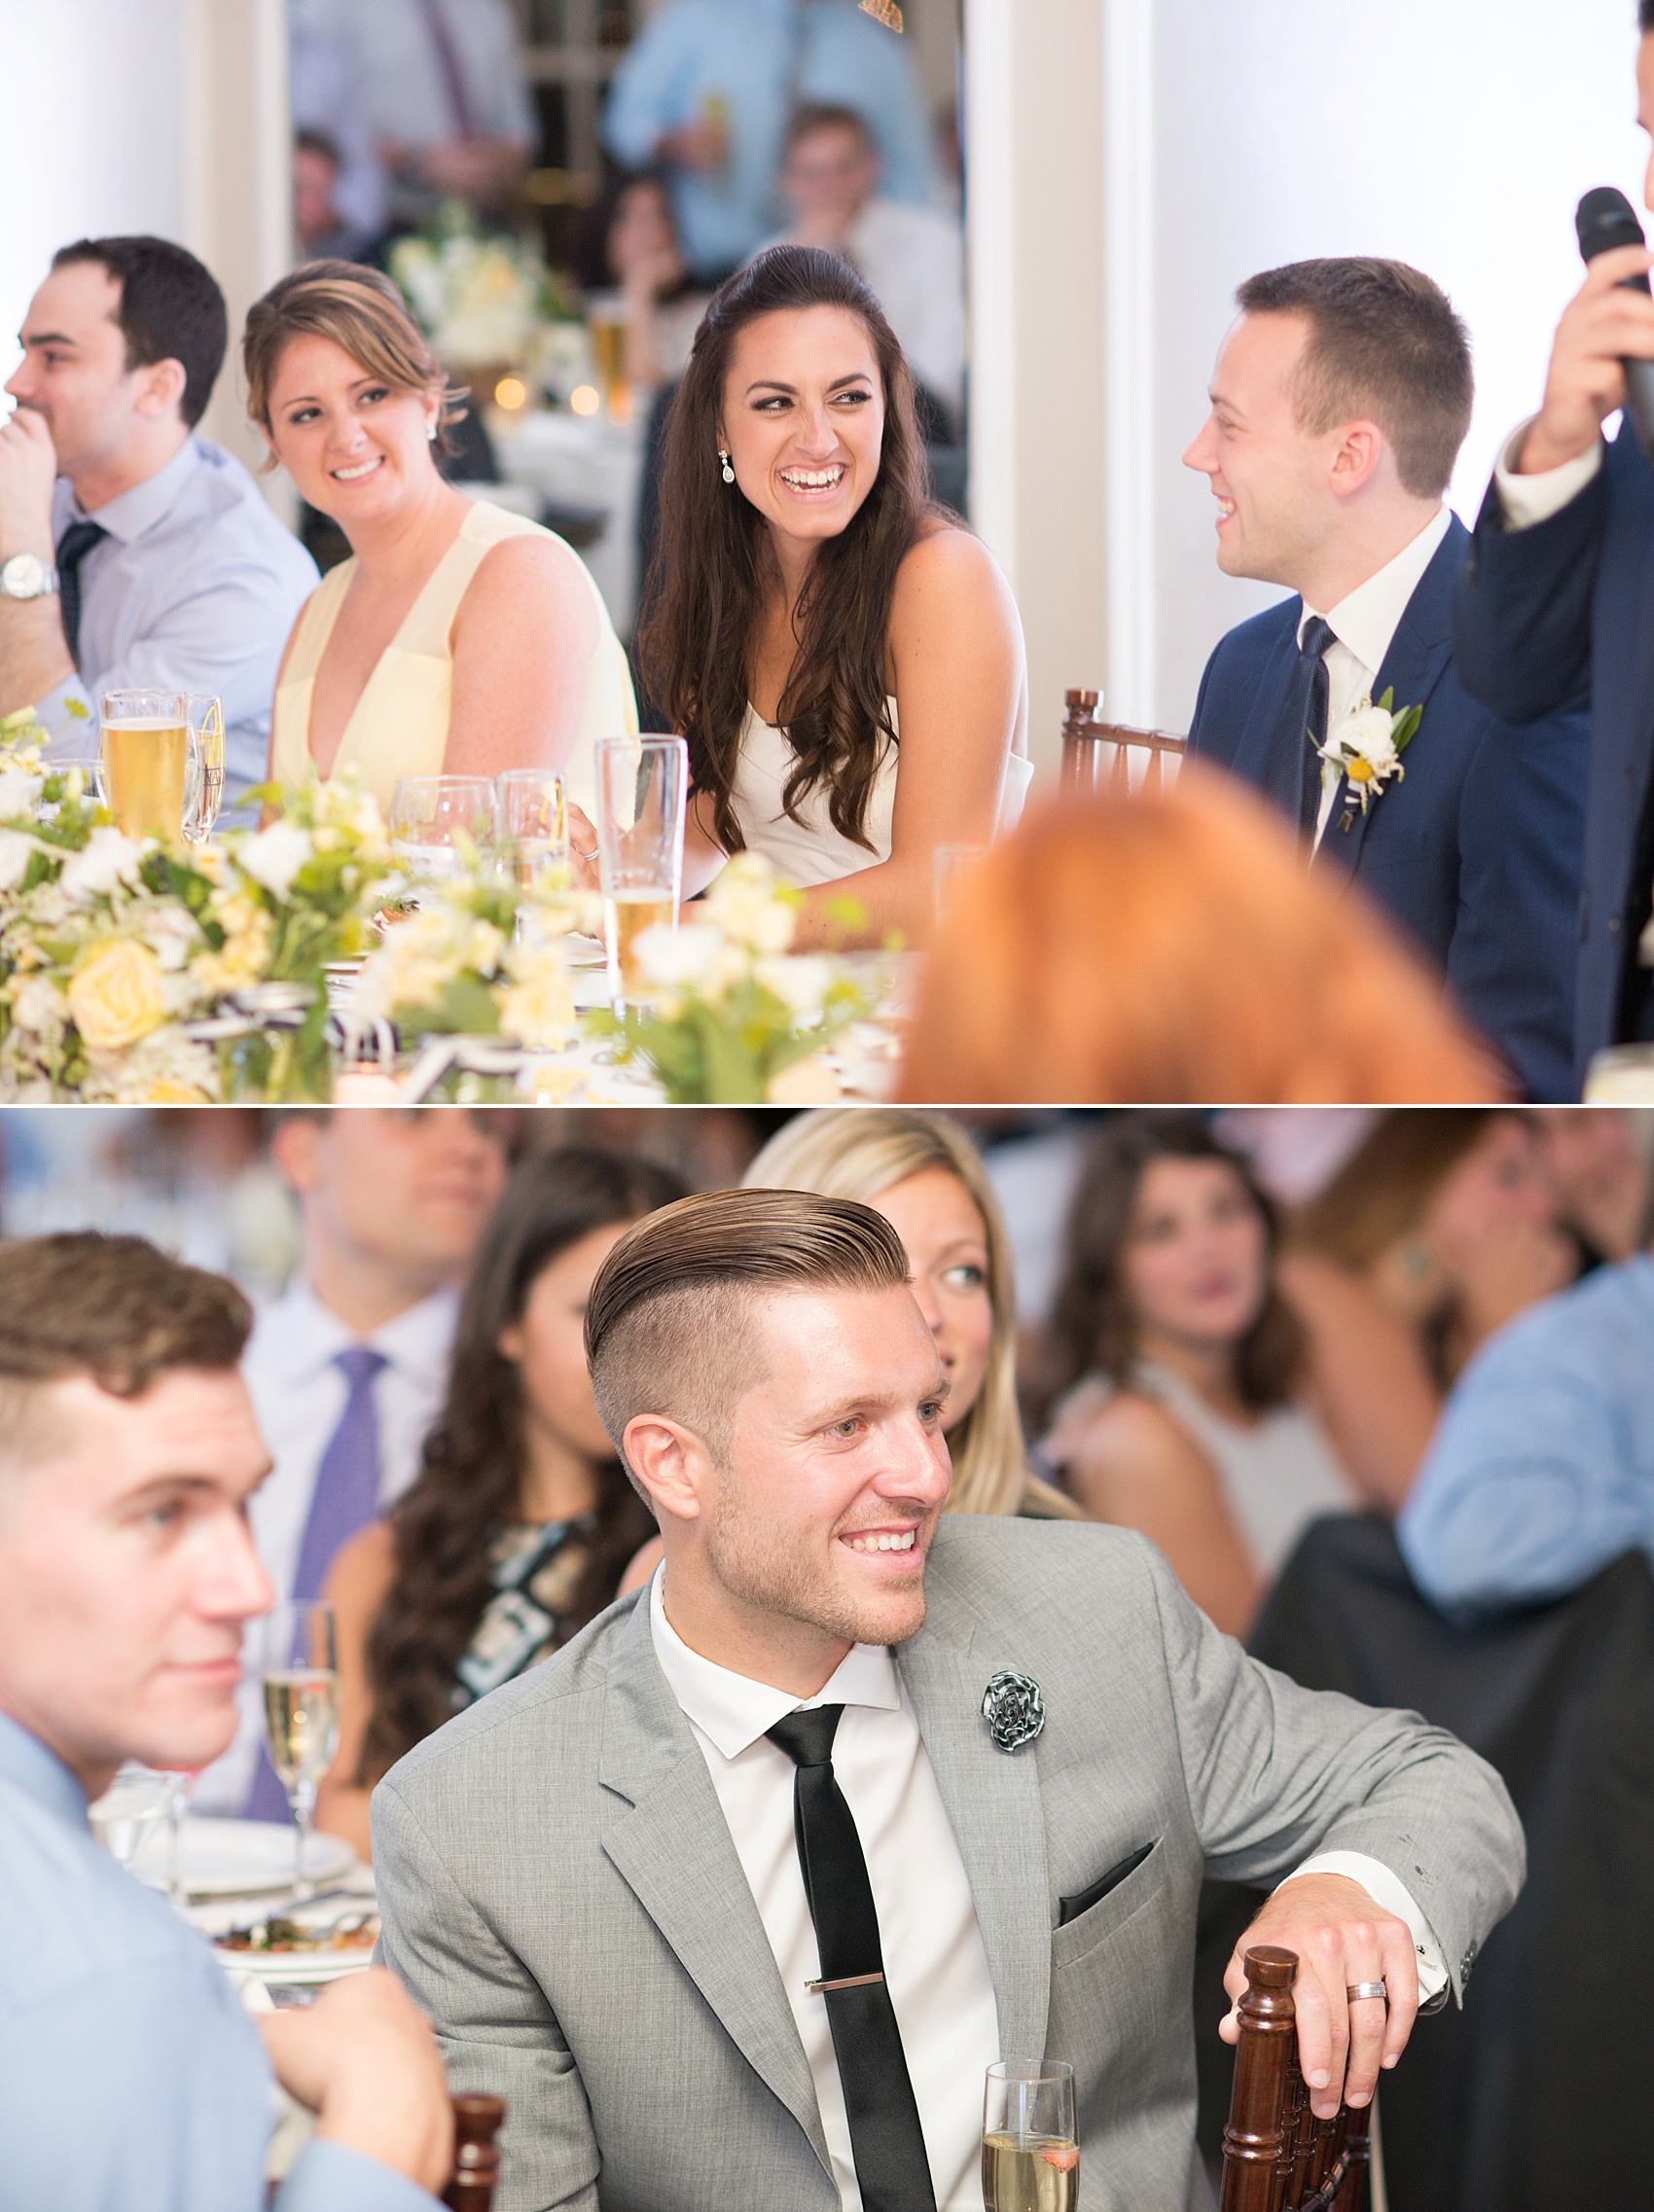 New Jersey waterfront wedding with a nautical theme at the Molly Pitcher Inn. Photo by Mikkel Paige Photography.